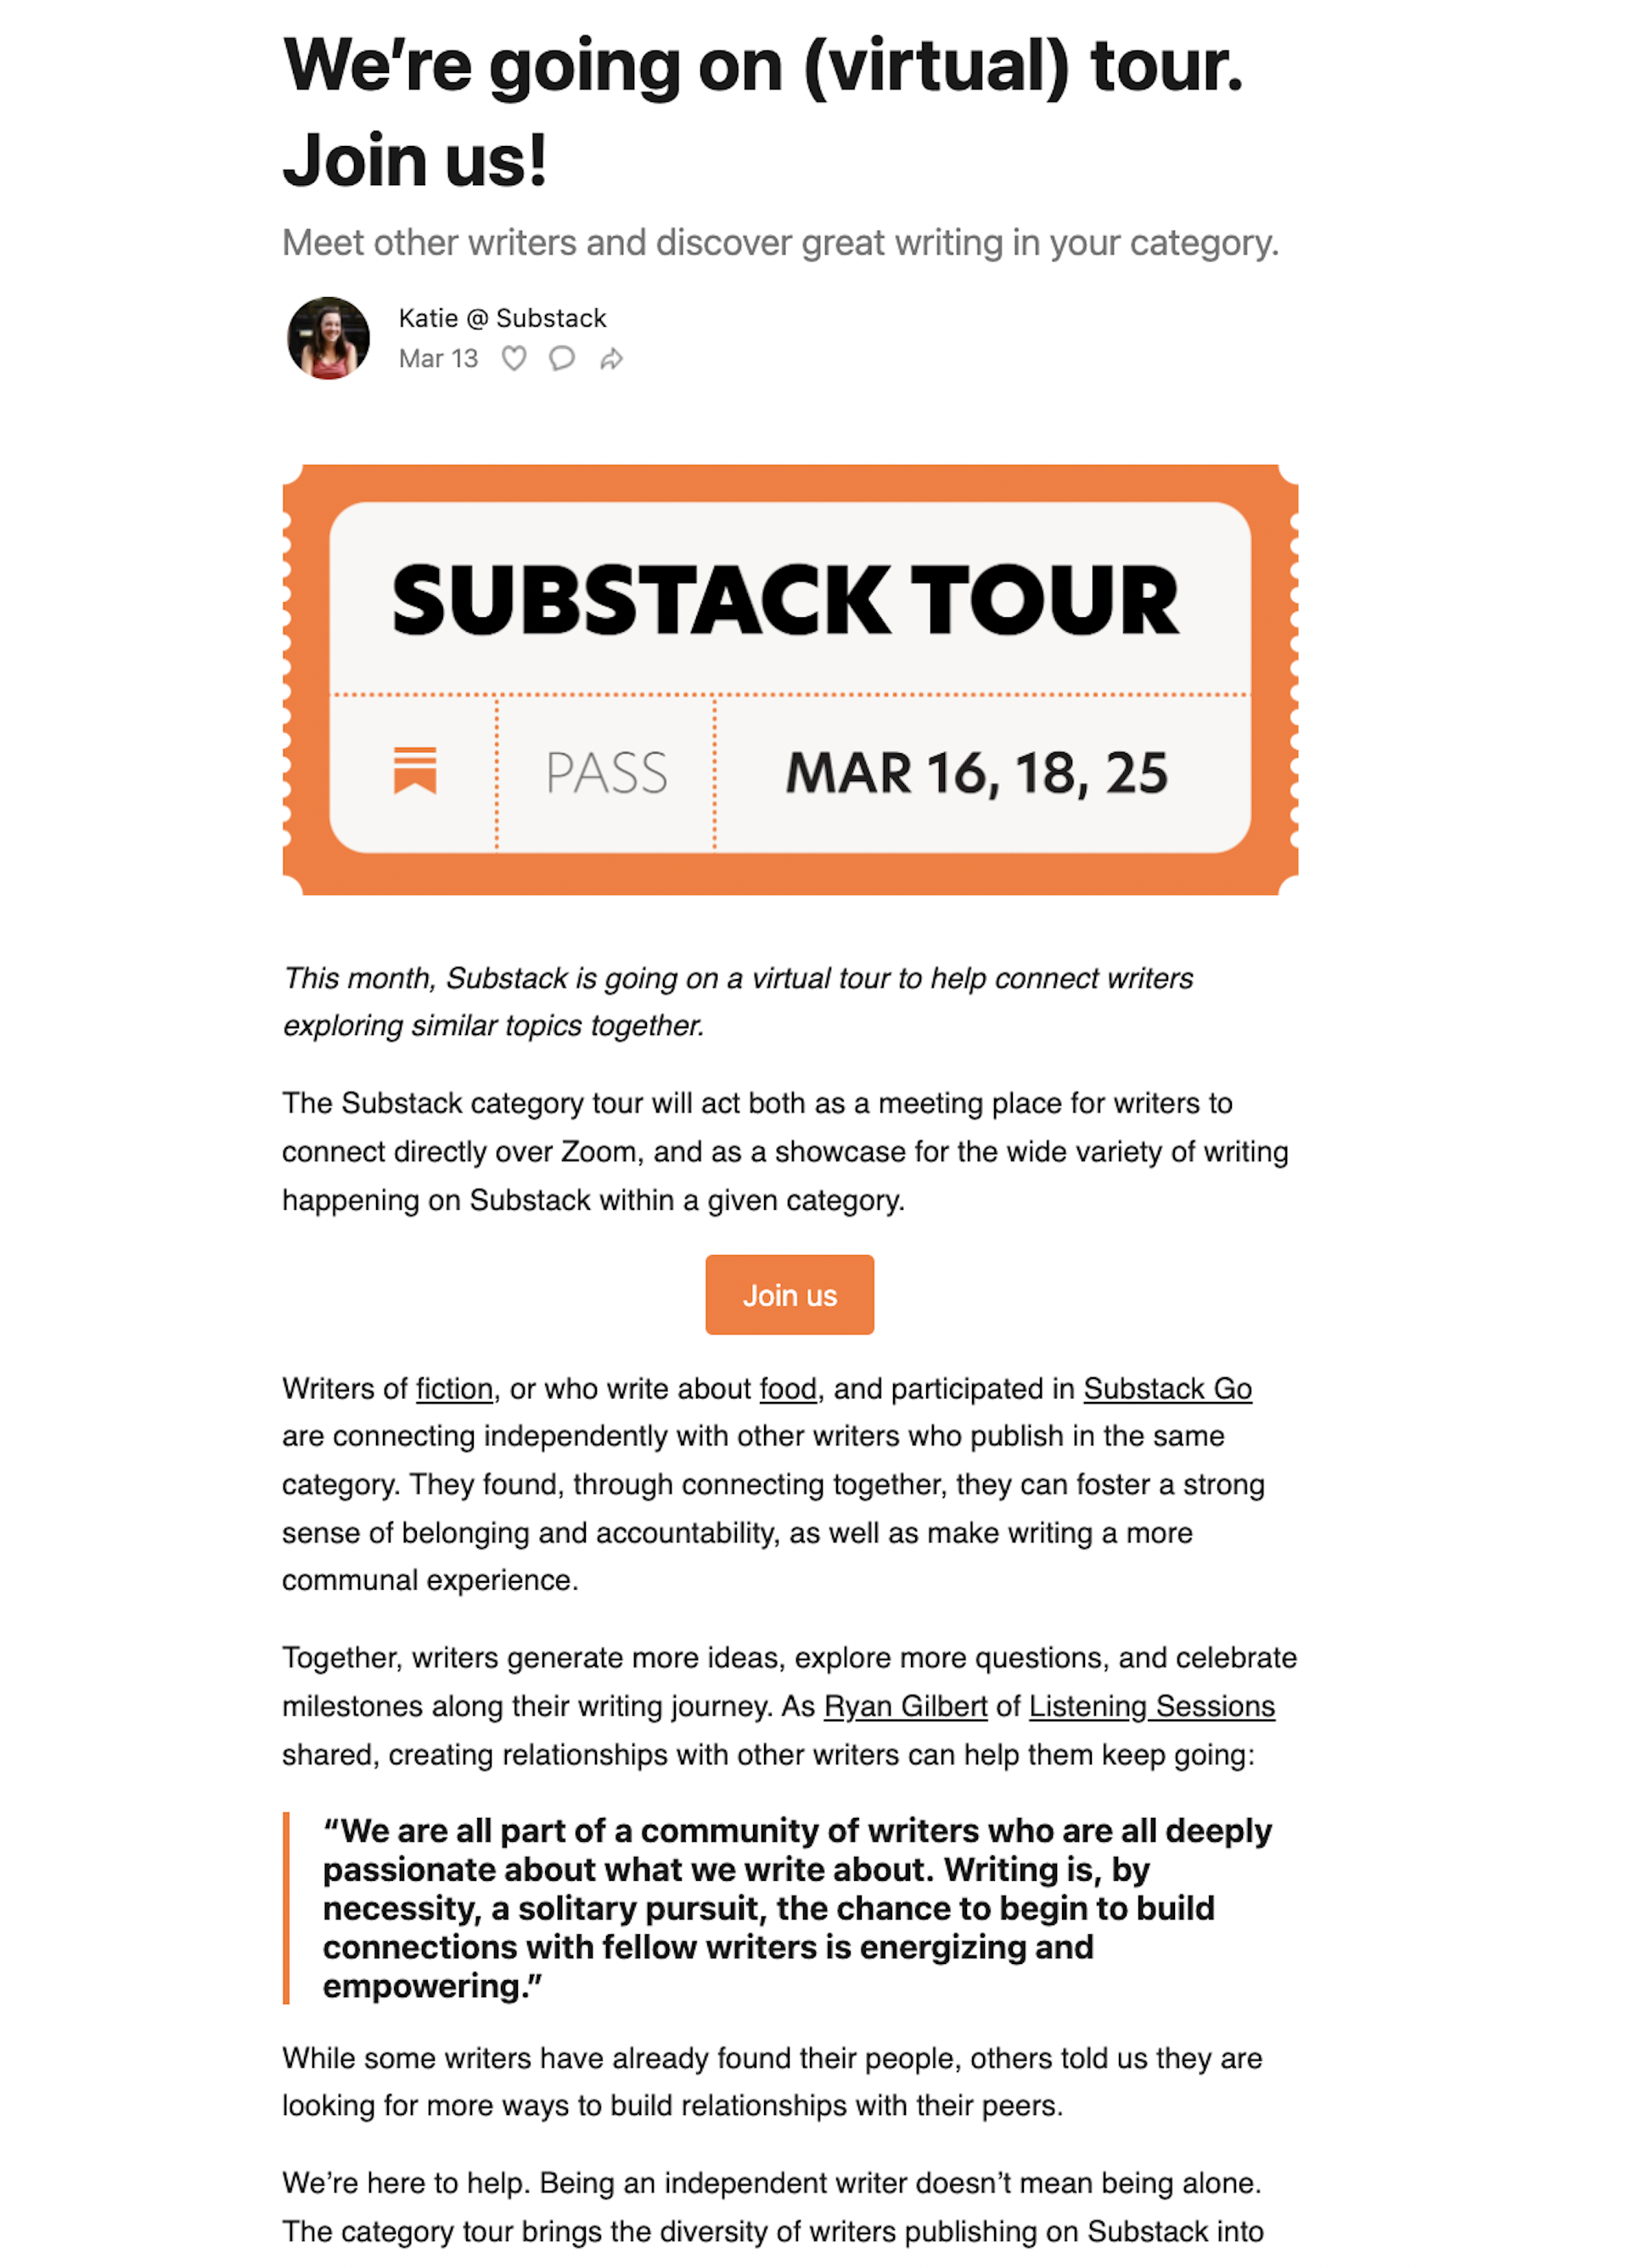 Substack Tour email invite example